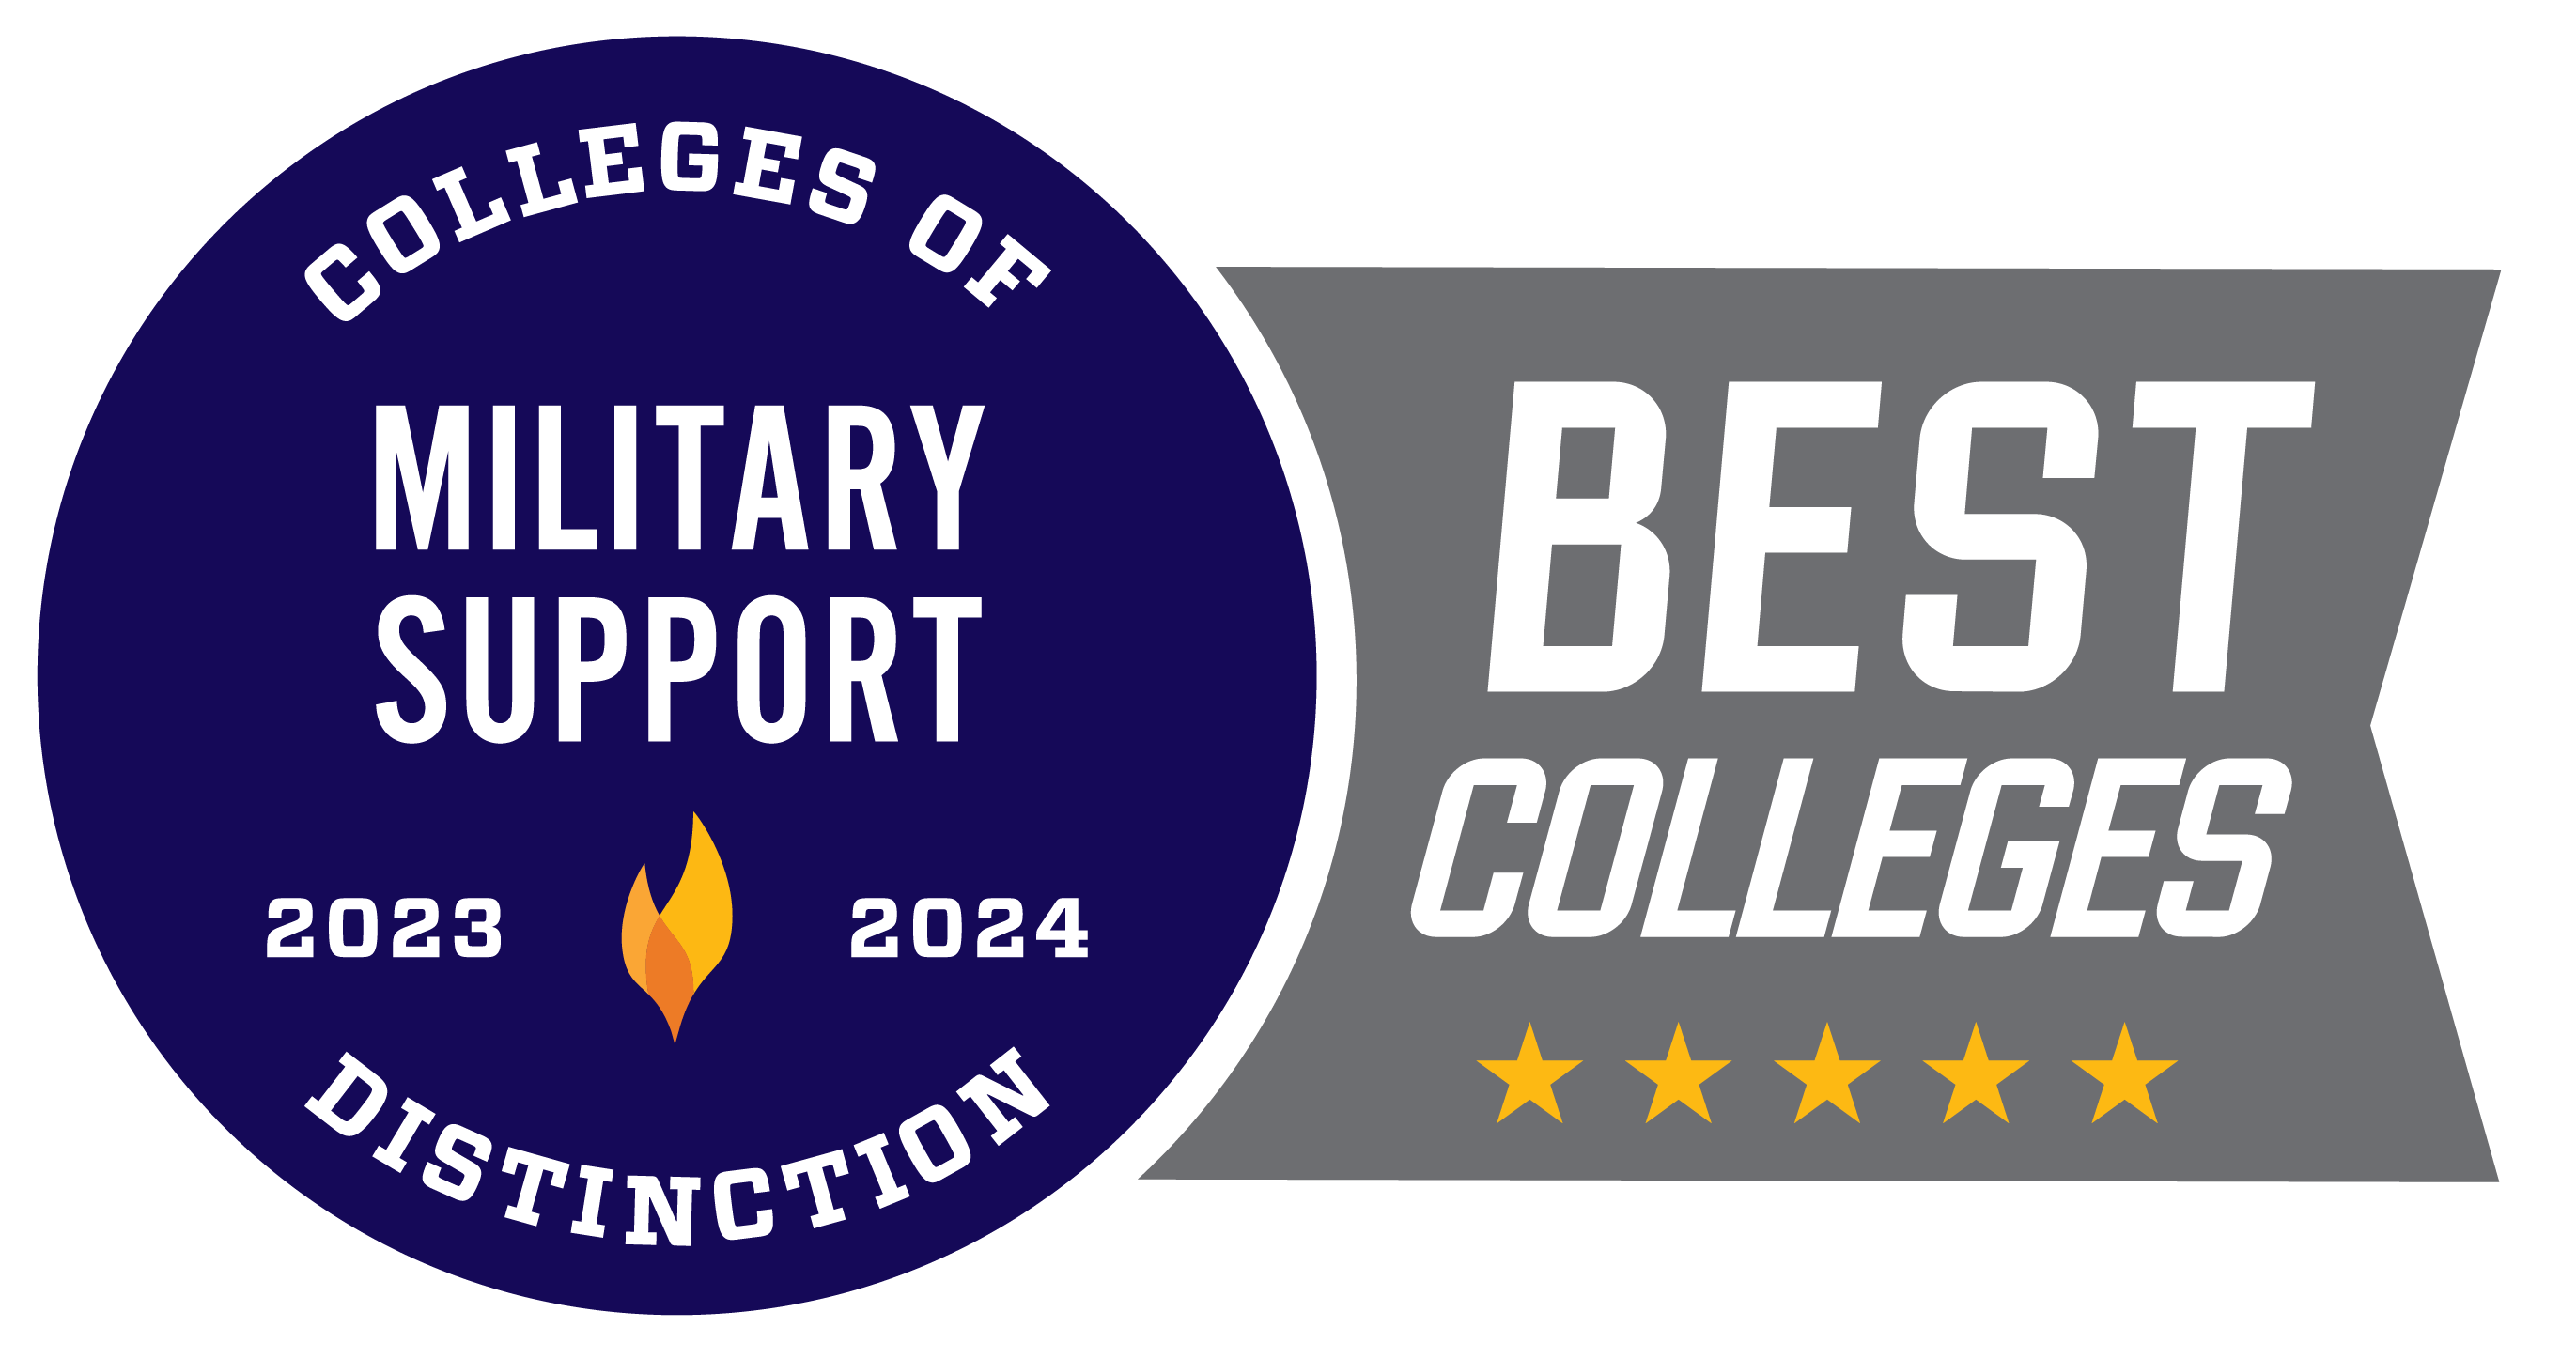 Colleges of Distinction - Military Support 2023-2024